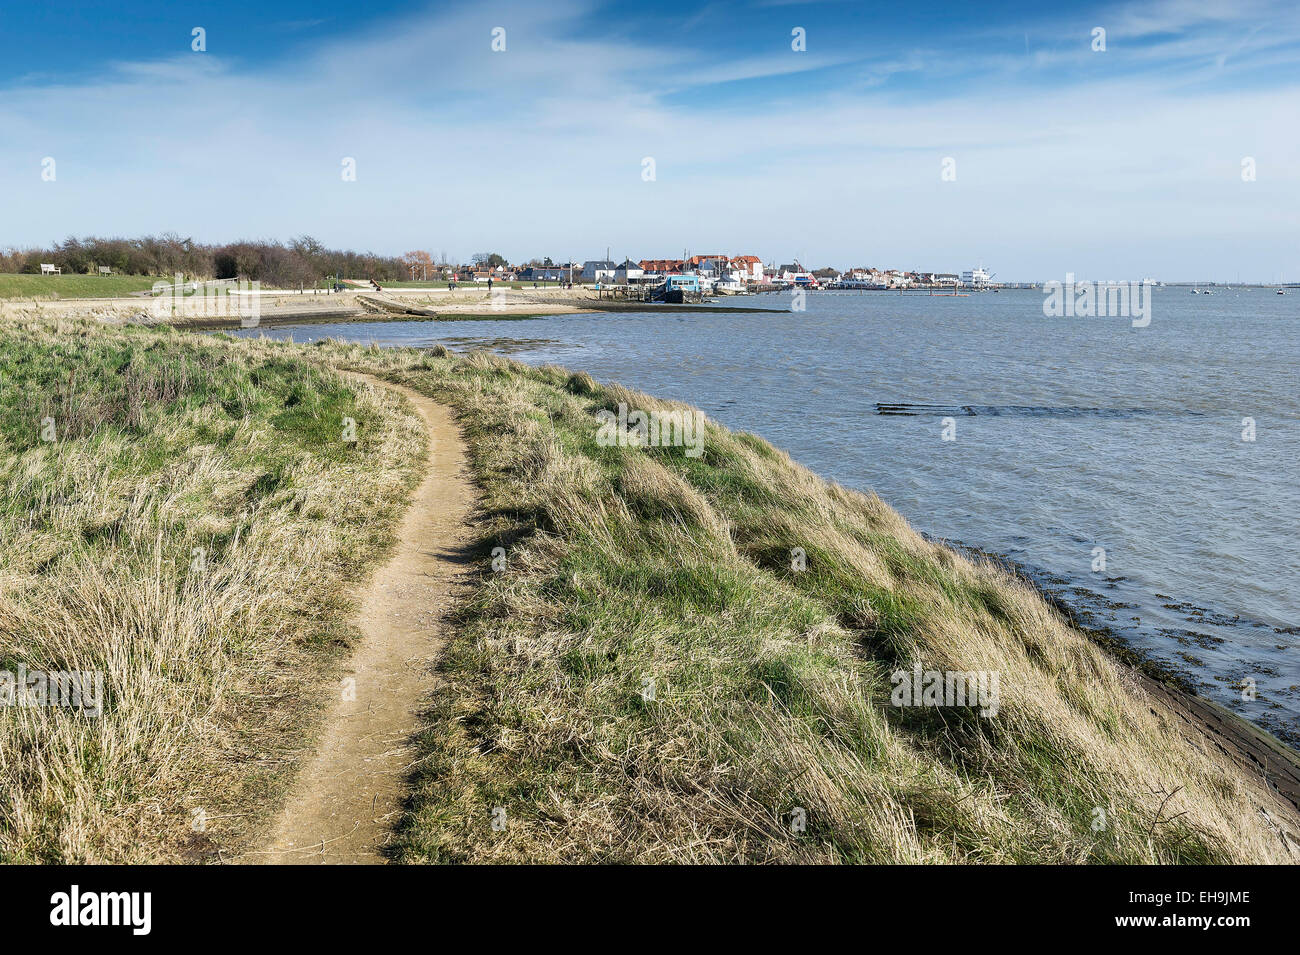 The town of Burnham on Crouch on the banks of the River Crouch in Essex. Stock Photo